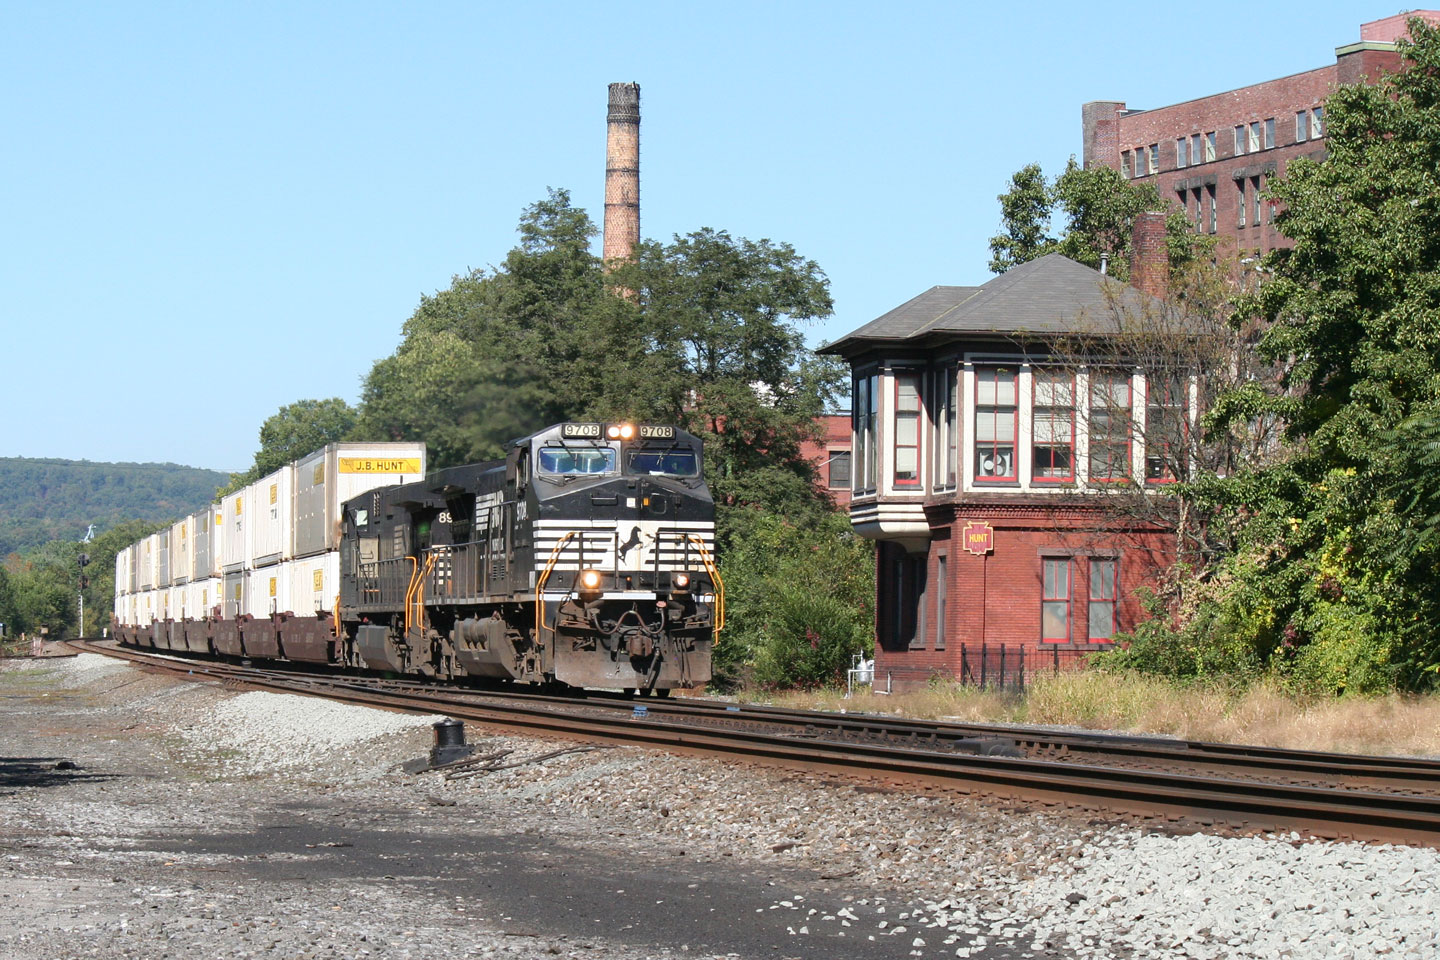 One of NS's fleet of stack trains roars past HUNT tower.